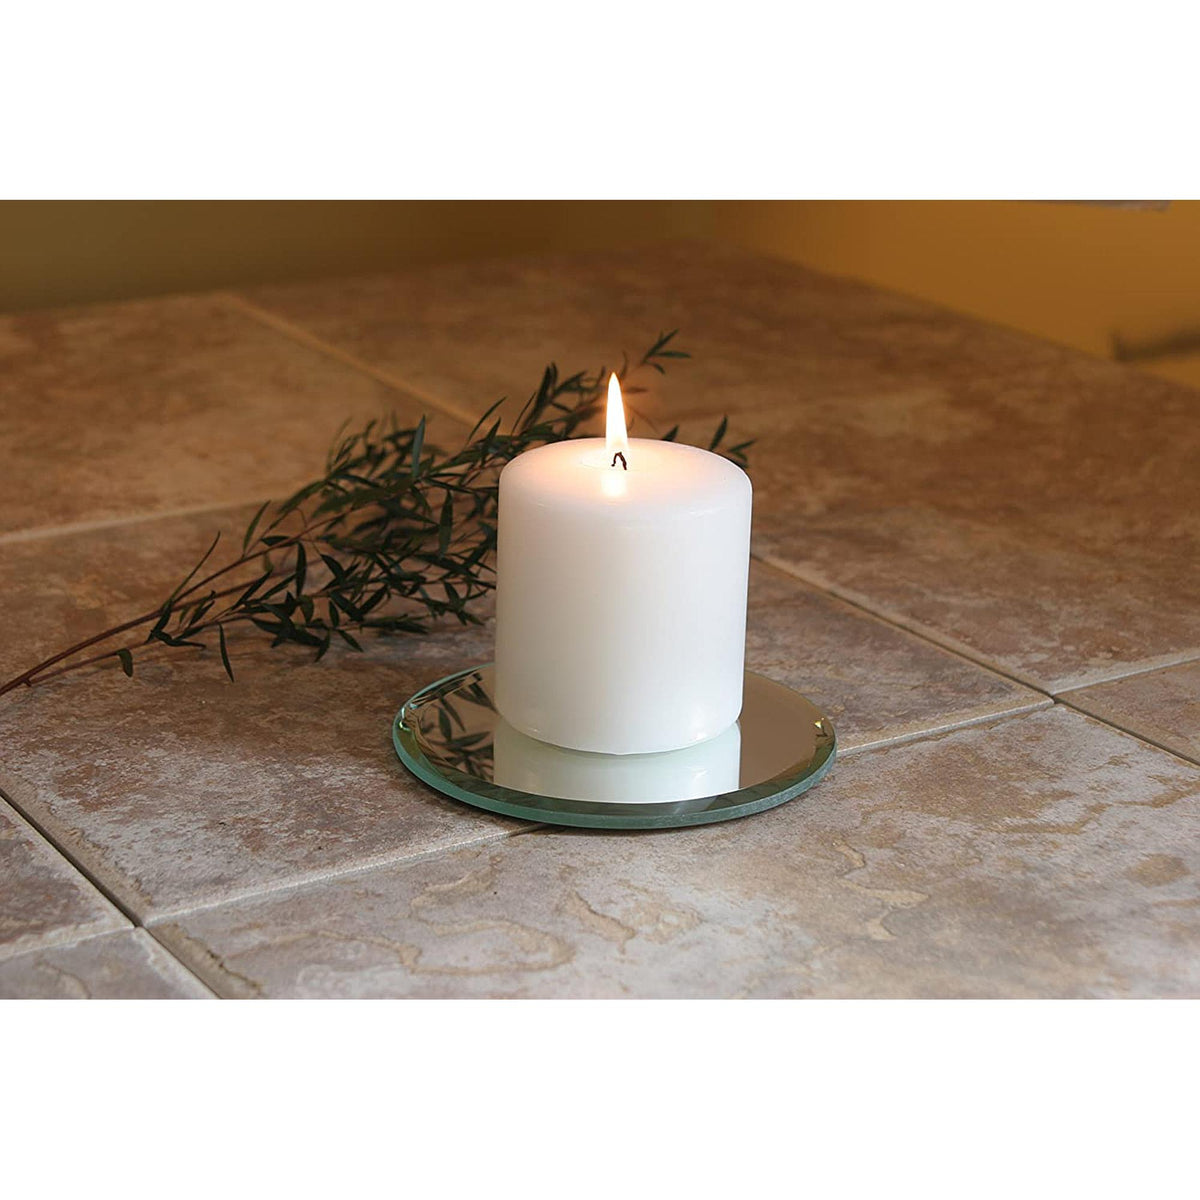 HOSLEY®  Unscented Pillar Candles, White Color, Set of 4, 4 inches High each